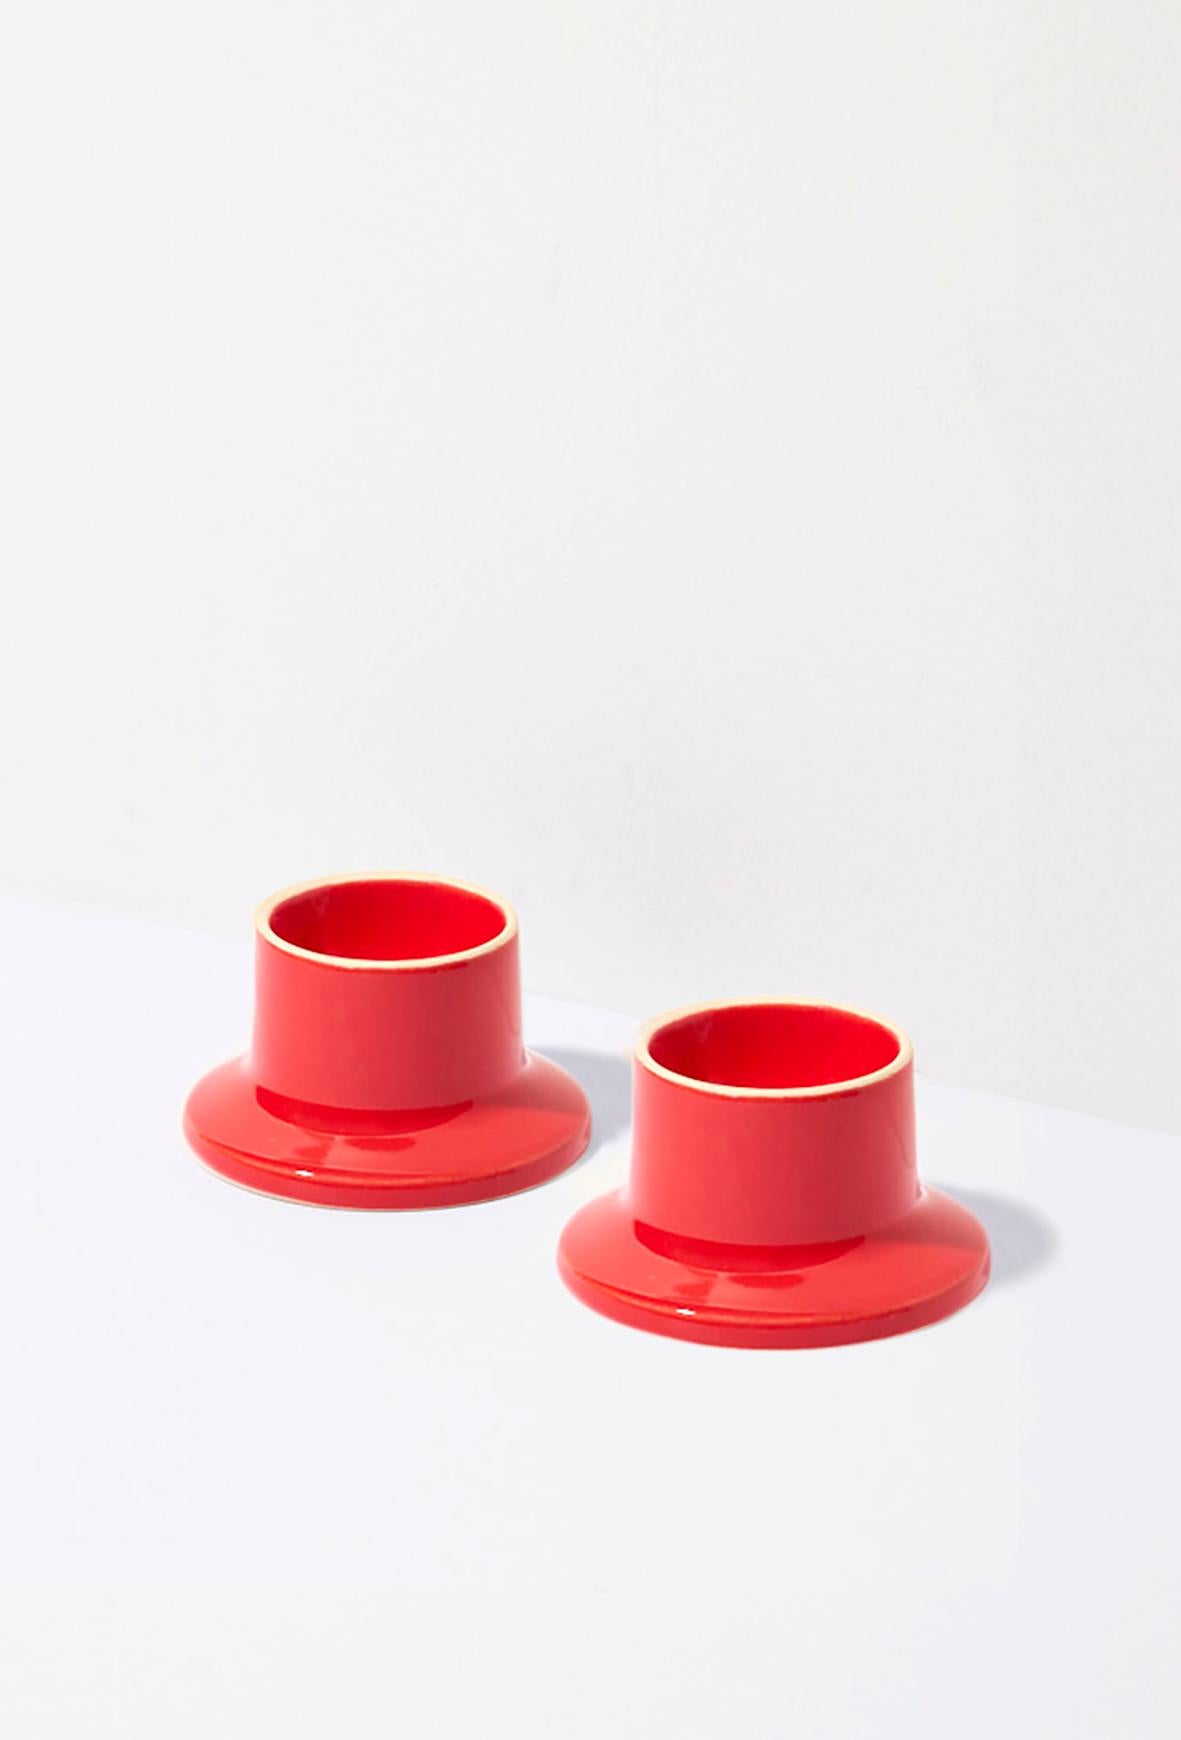 The egg holder JULA complements the OKO / Design breakfast set. This small, colorful tableware piece will brighten up any breakfast! Selling in set of two. 